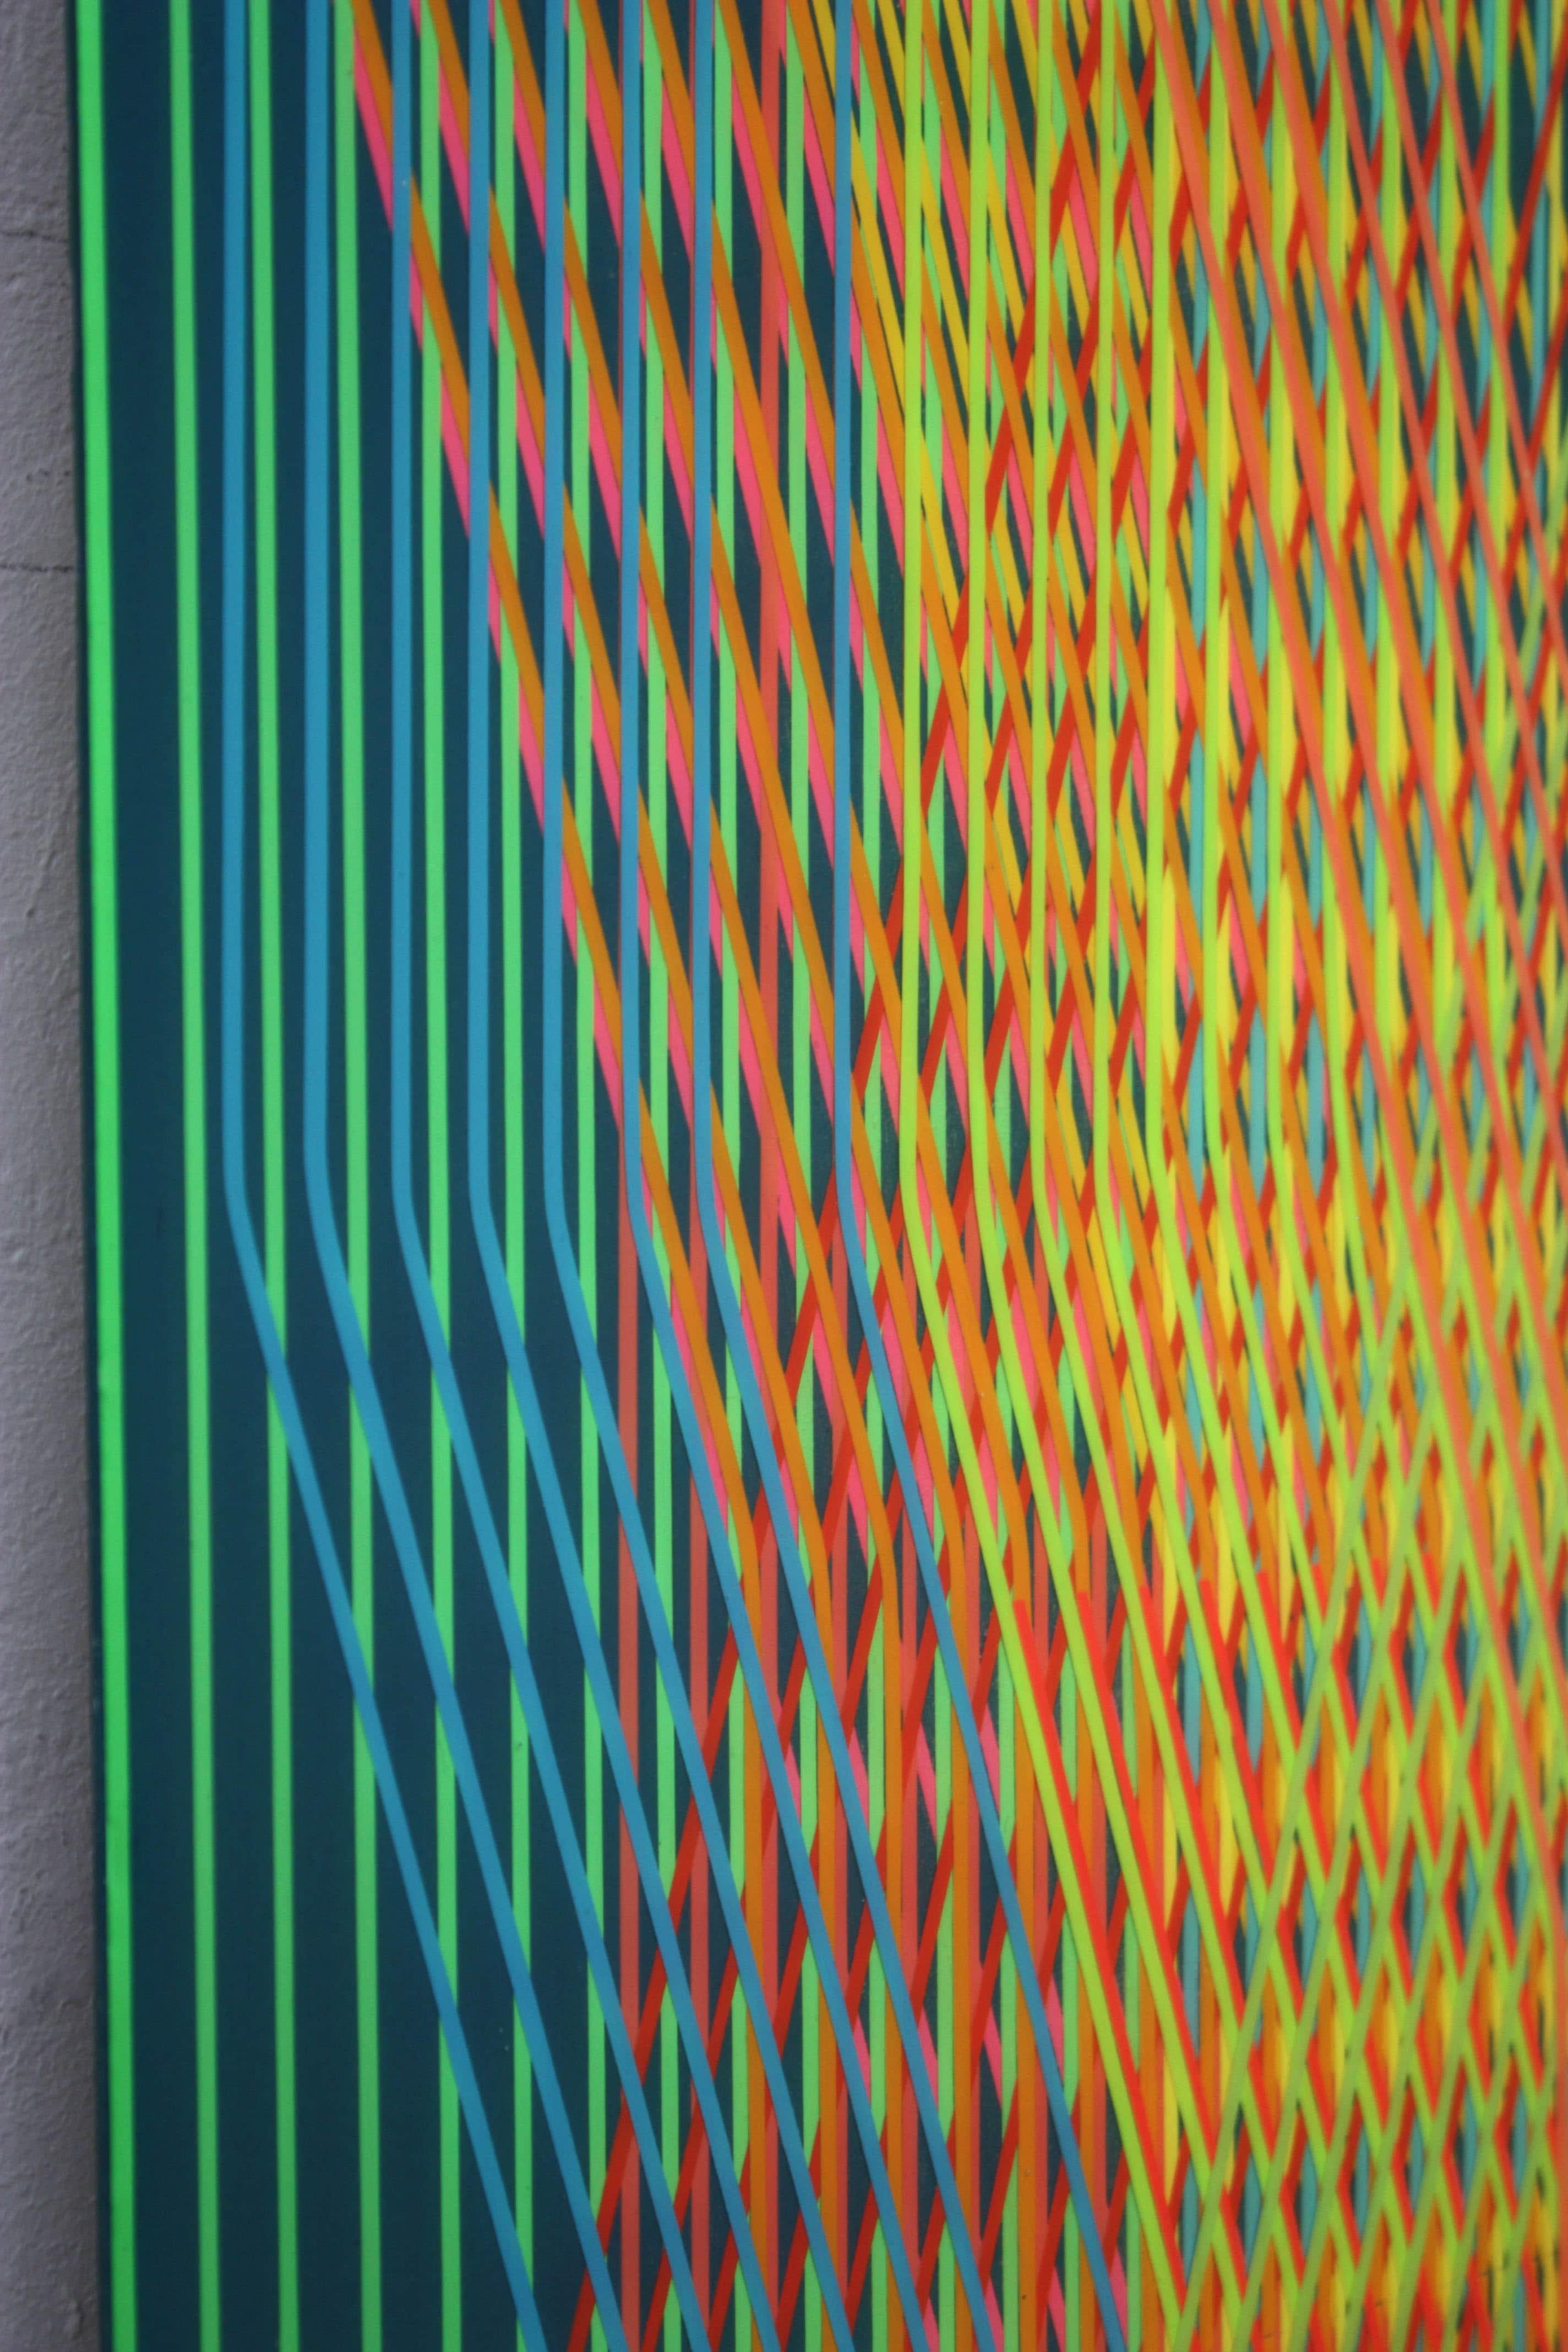 Line 1213-17 is an abstract painting by contemporary Korean artist Ahn Hyun-Ju.
Polyester, acrylic and epoxy on aluminum, 52 x 32 cm. Signed, sold unframed.
The 